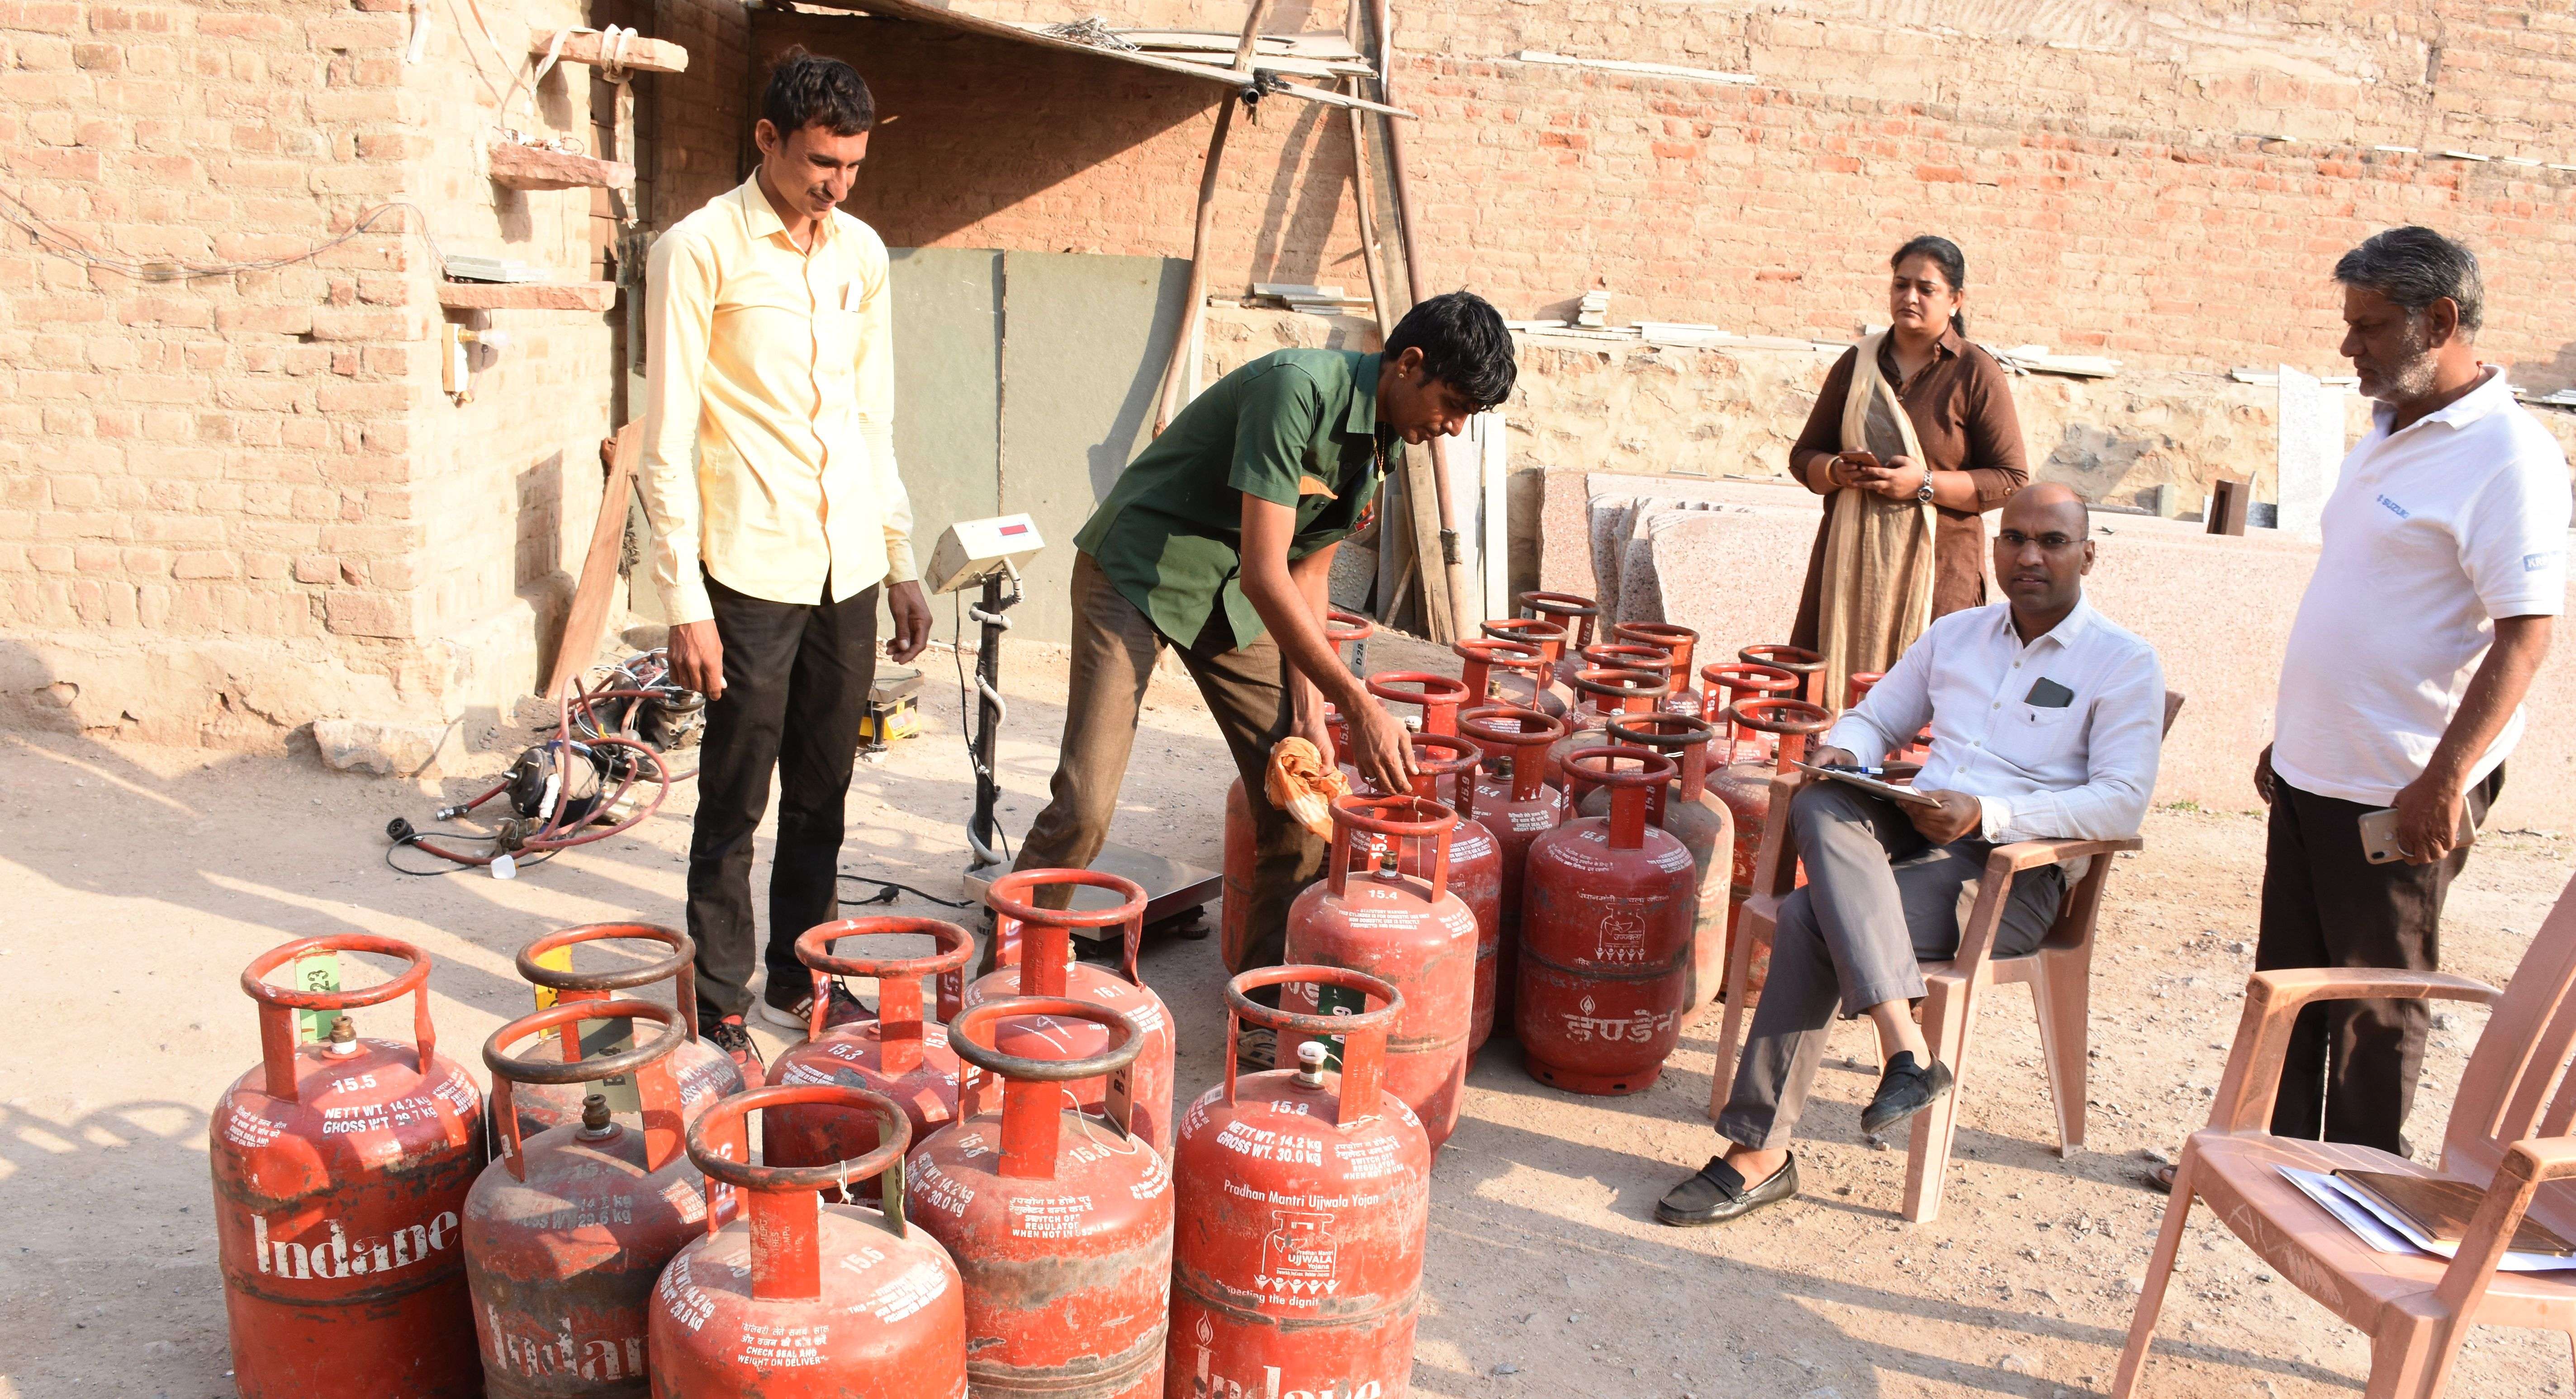 bikaner- 27 domestic gas cylinders seized/ illegal gas refilling